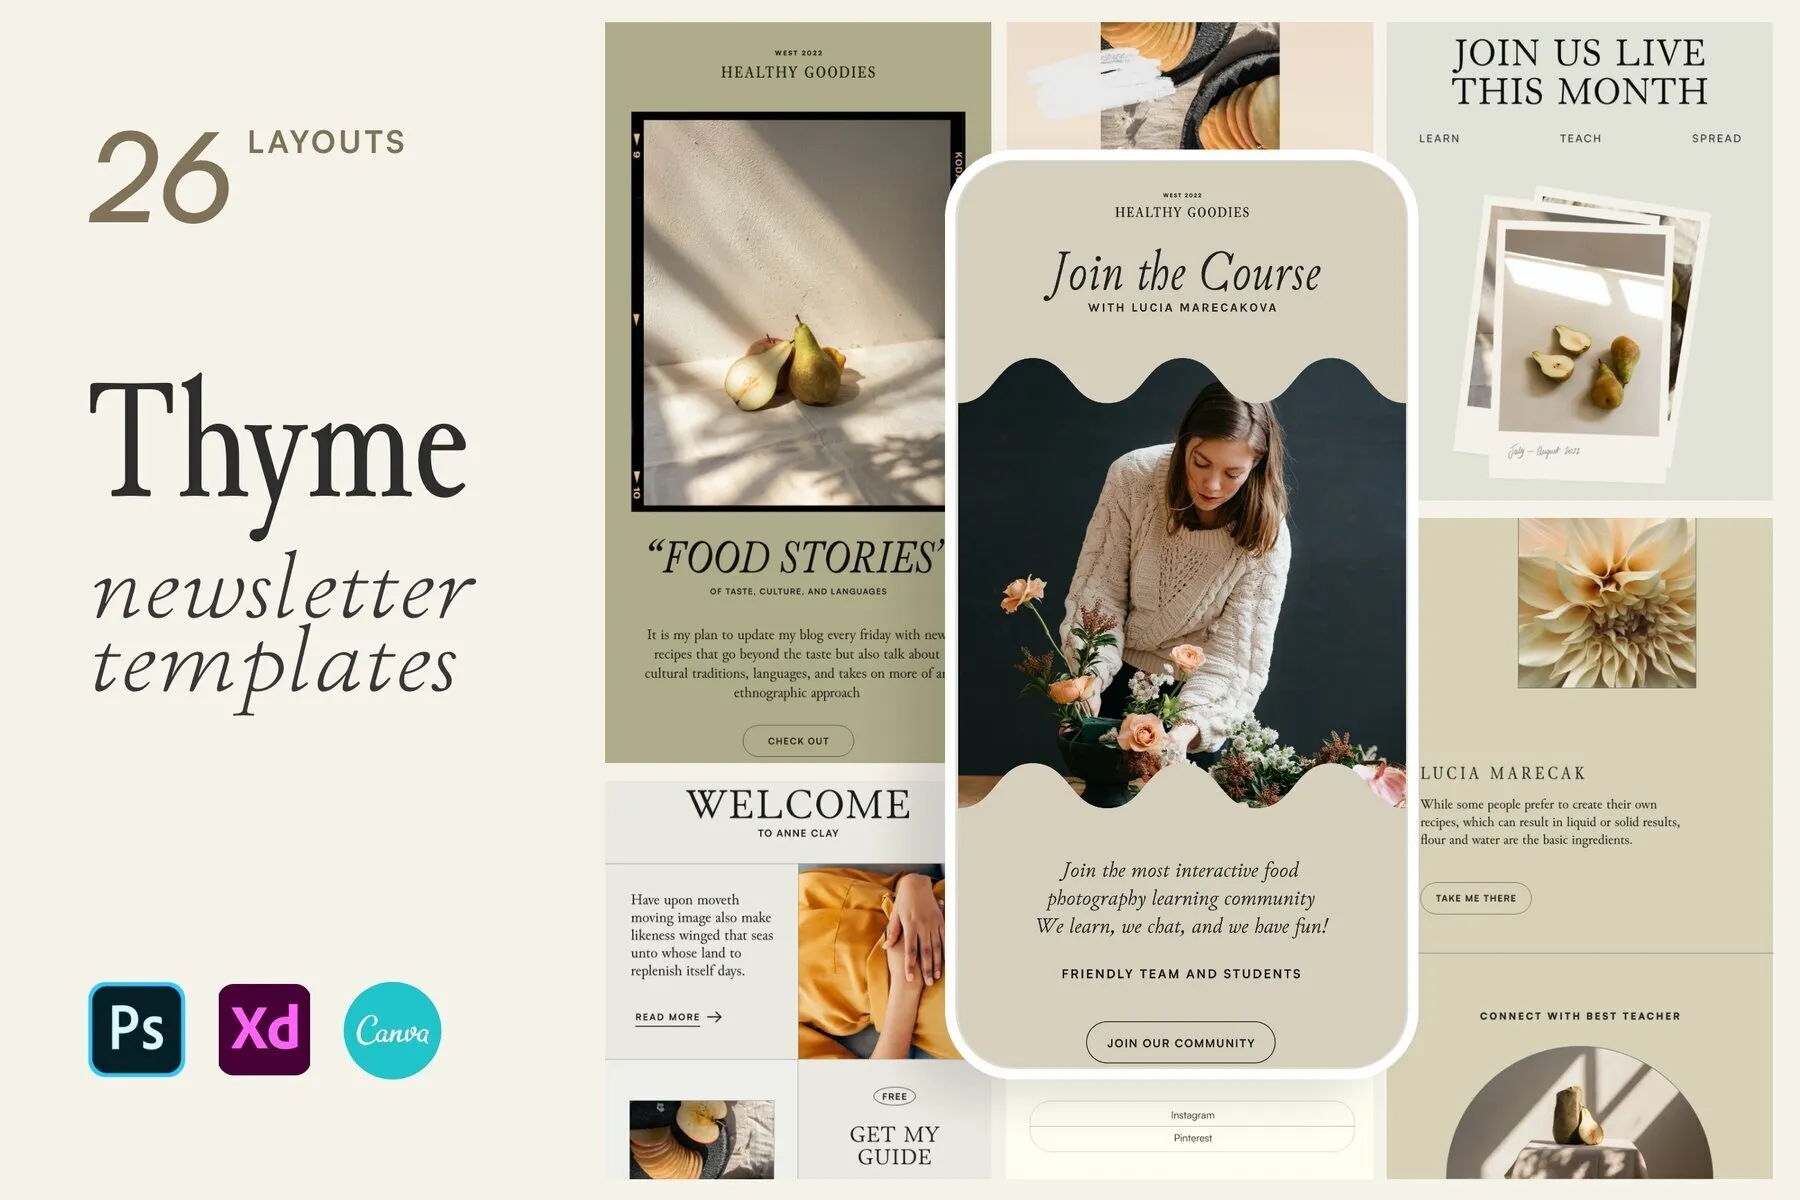 Thyme Newsletter Templates - Canva